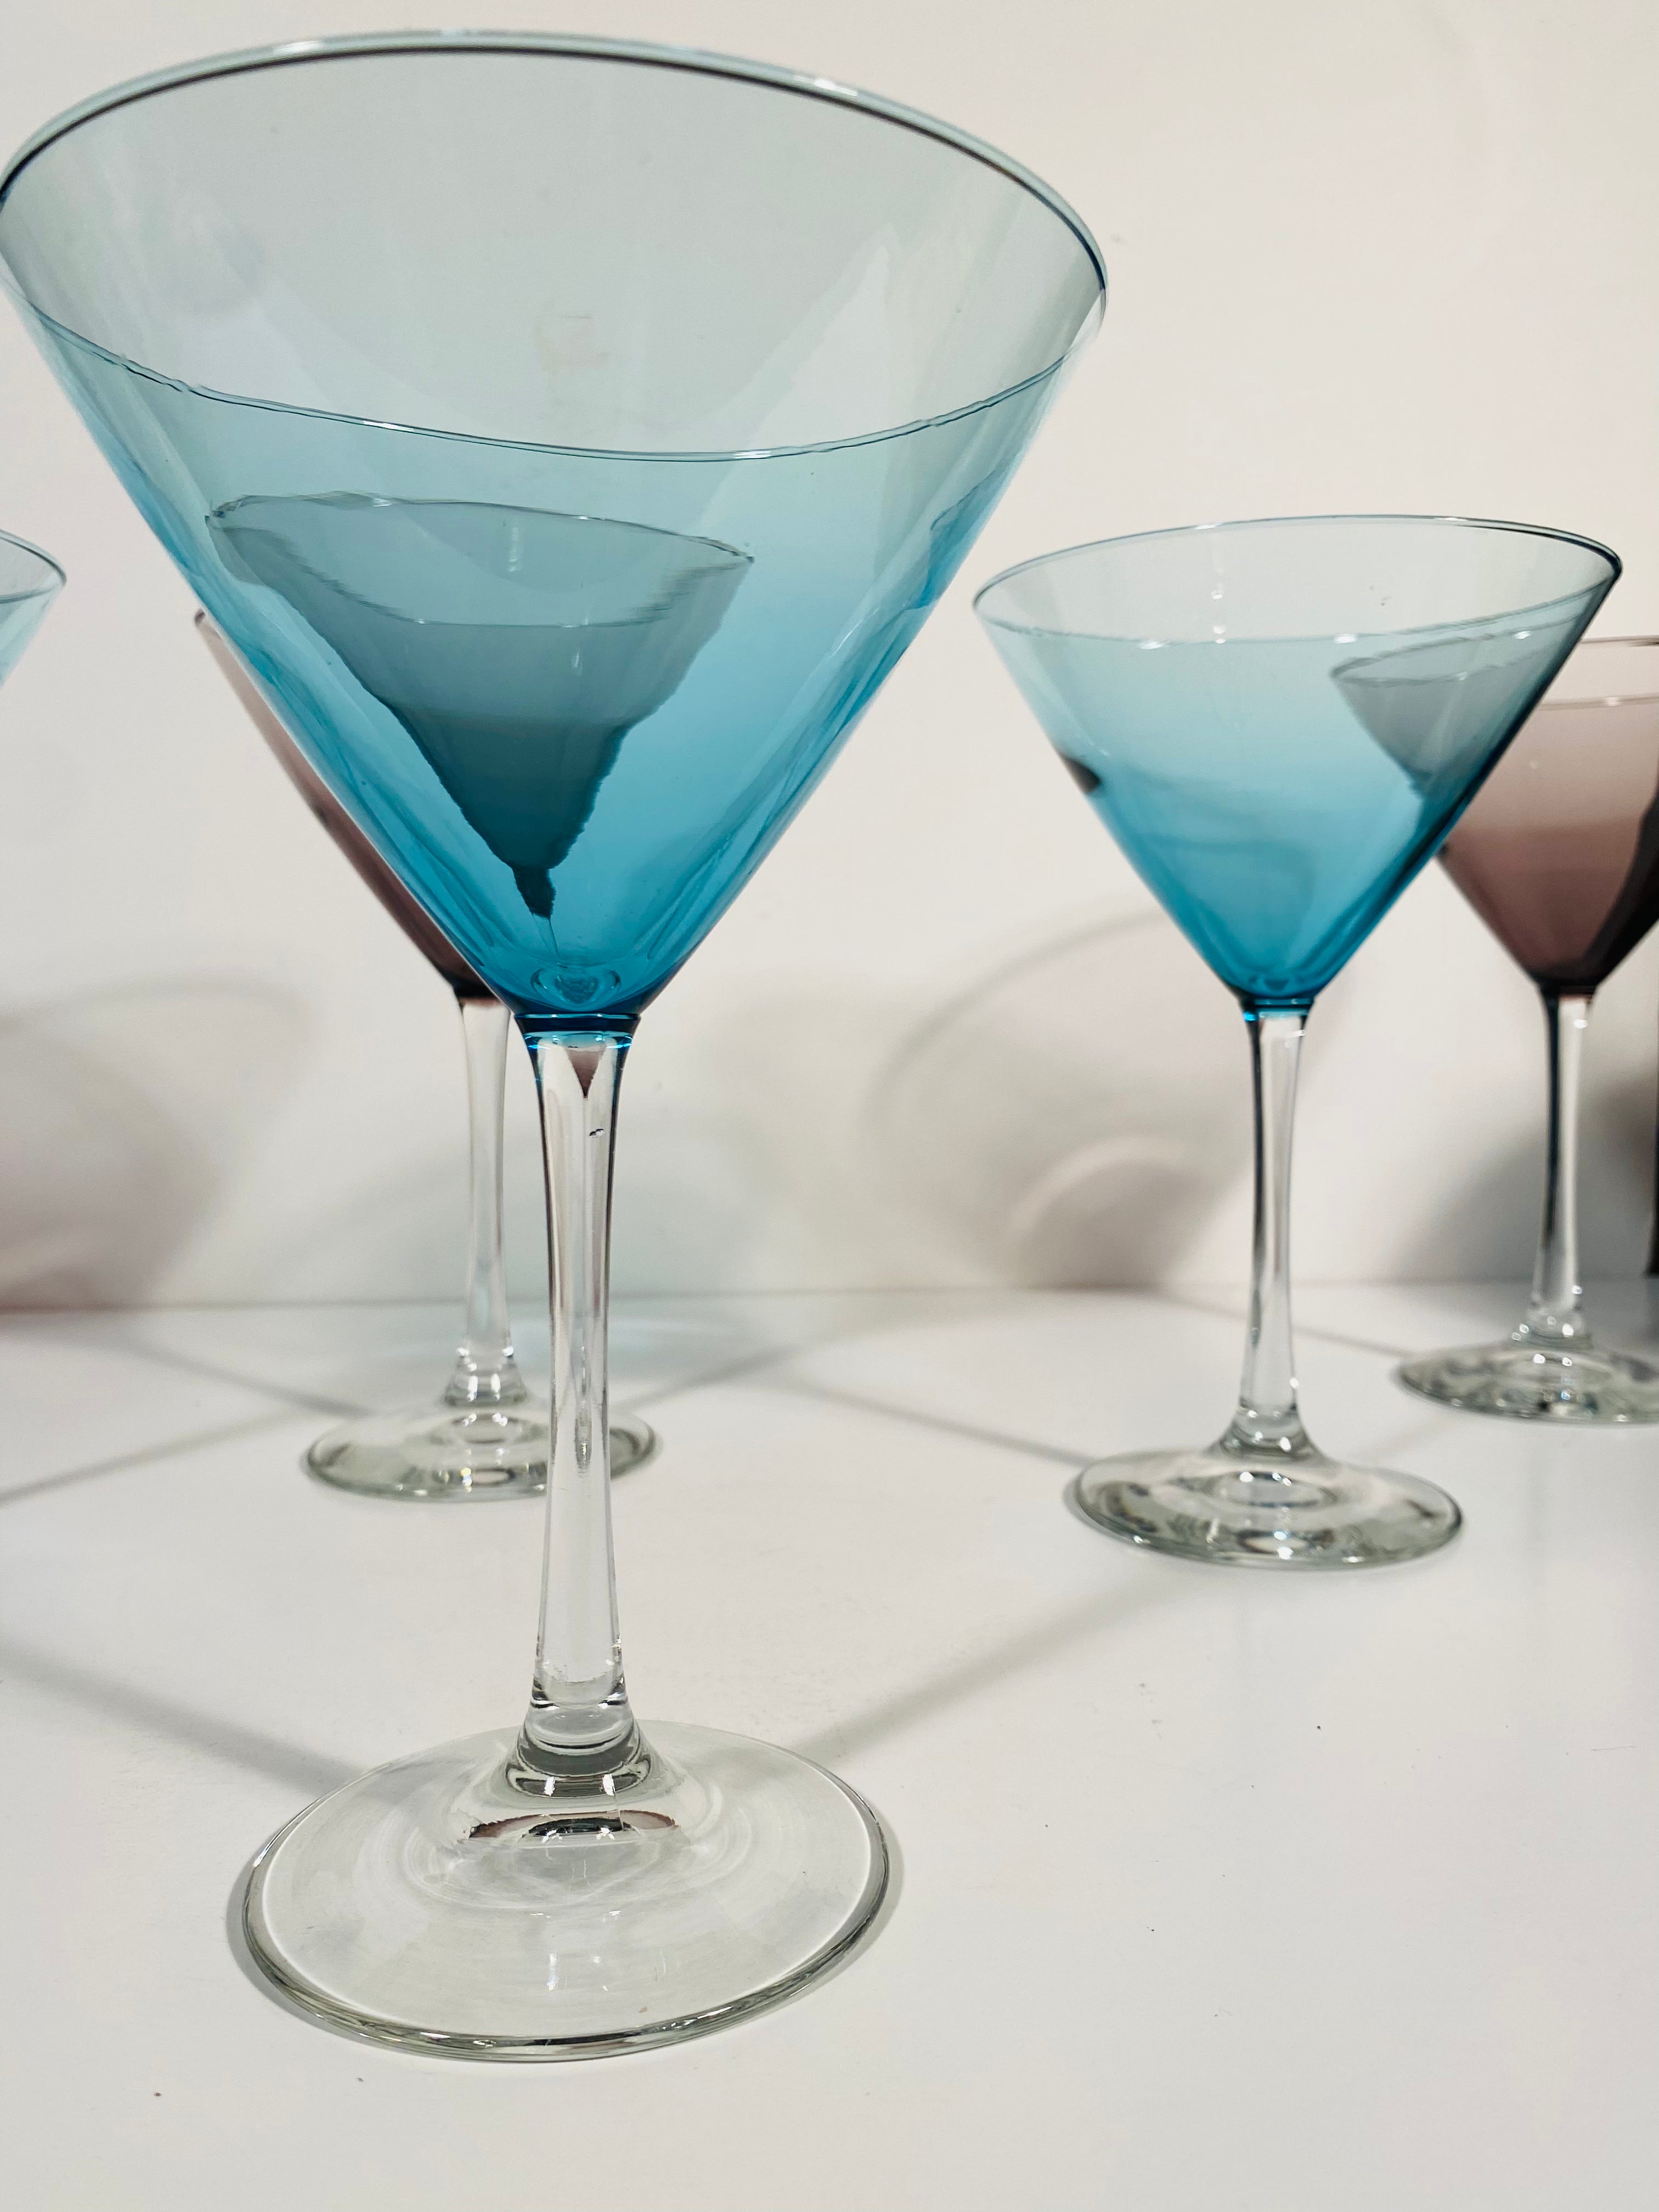 Vintage Turquoise and Amethyst Martini Glasses - Set of 6